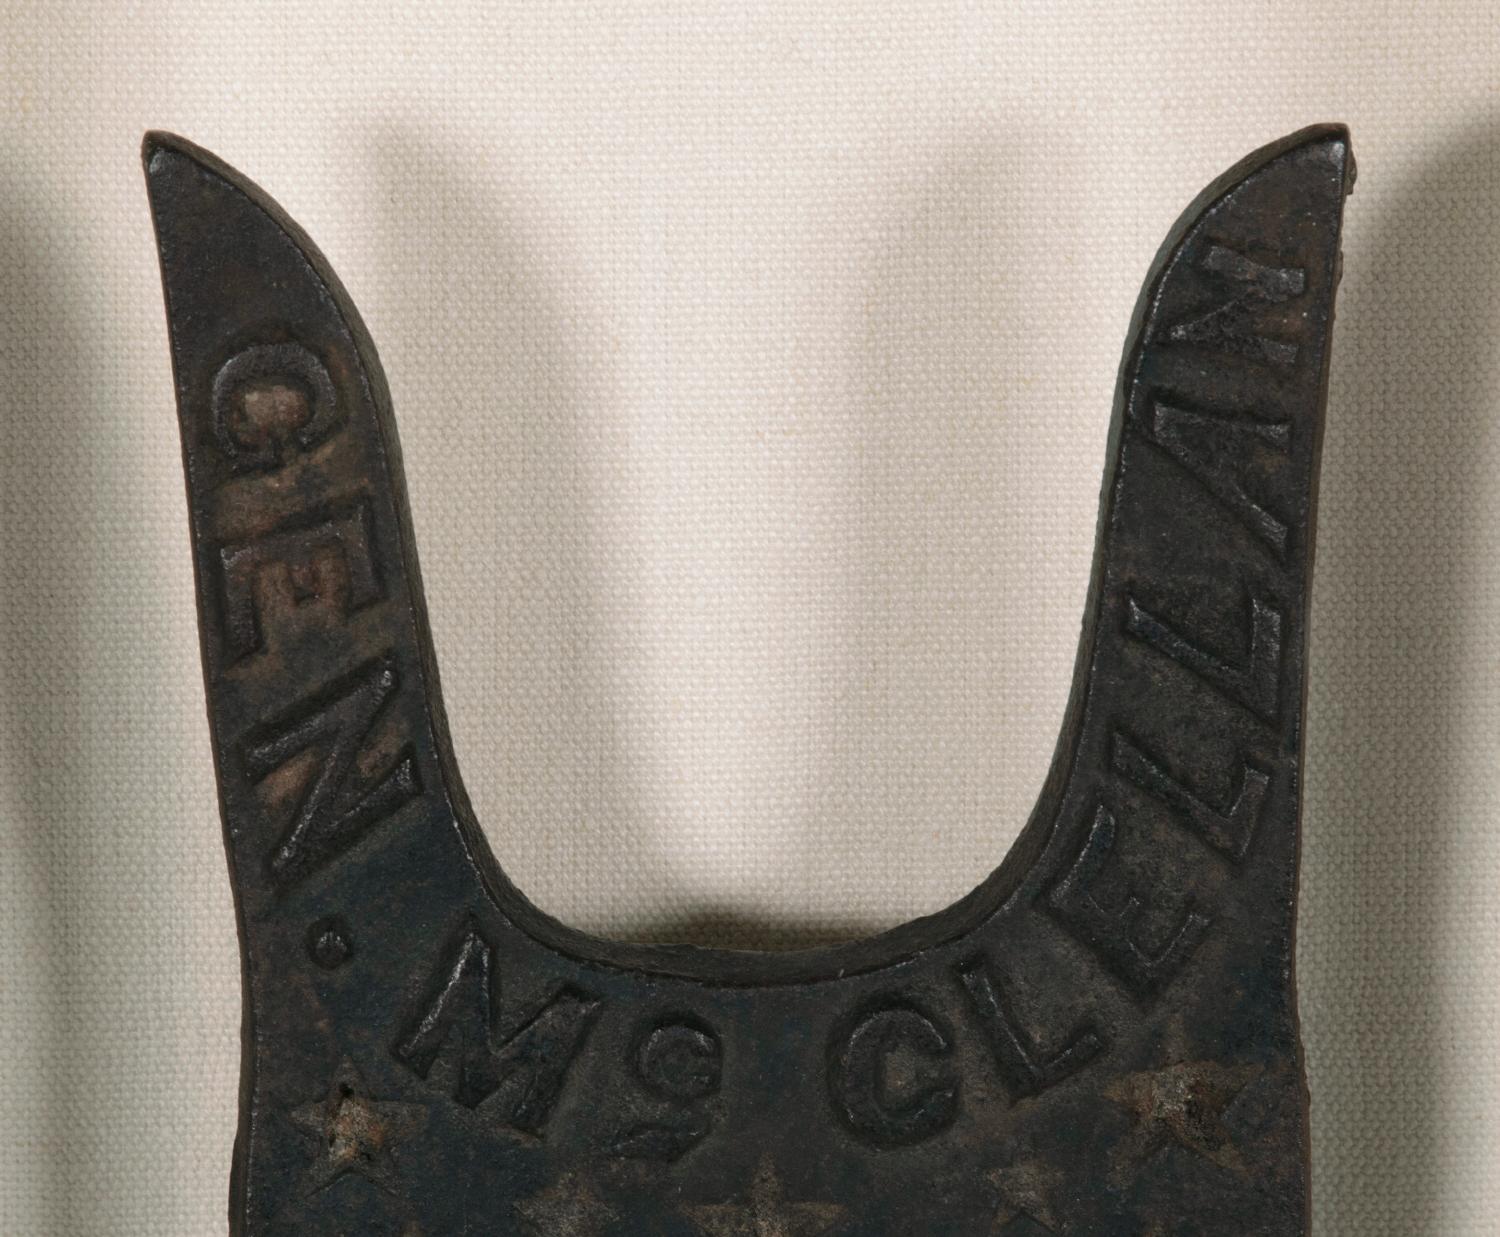 CAST IRON BOOT JACK, MADE FOR THE 1864 PRESIDENTIAL CAMPAIGN OF GENERAL GEORGE B. MC CLELLAN, WITH A FANTASTIC SLOGAN THAT READS 